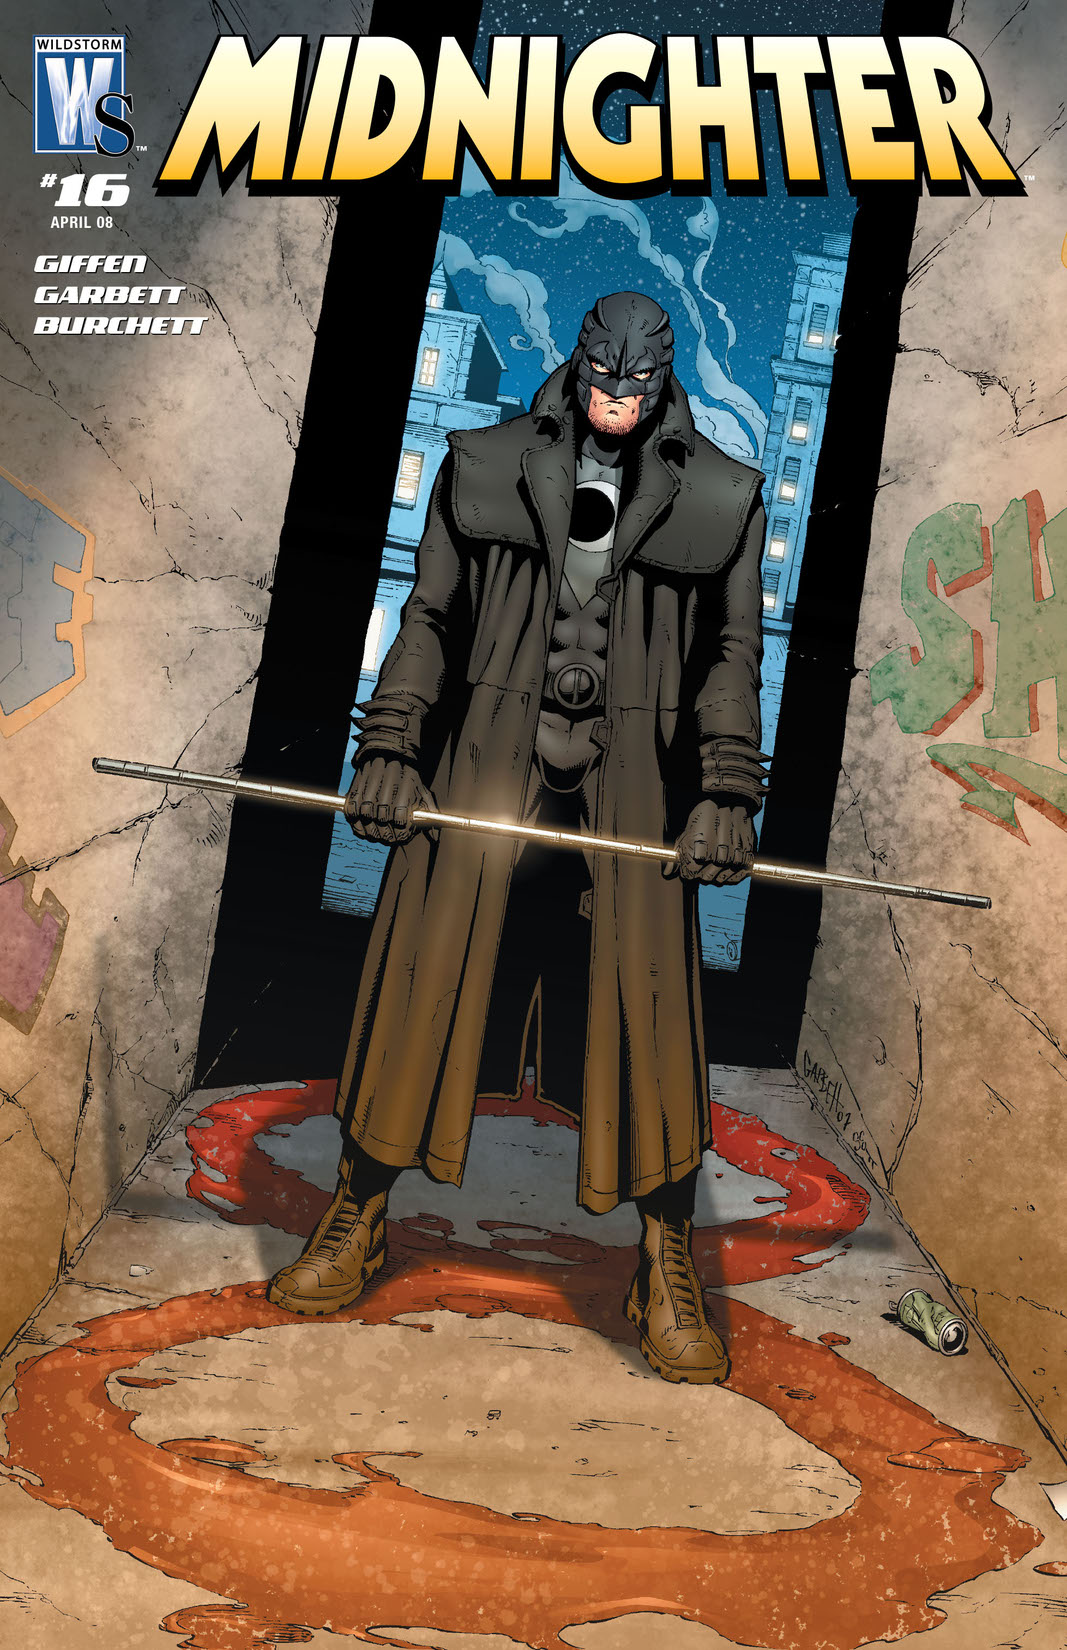 Midnighter (2006-) #16 preview images